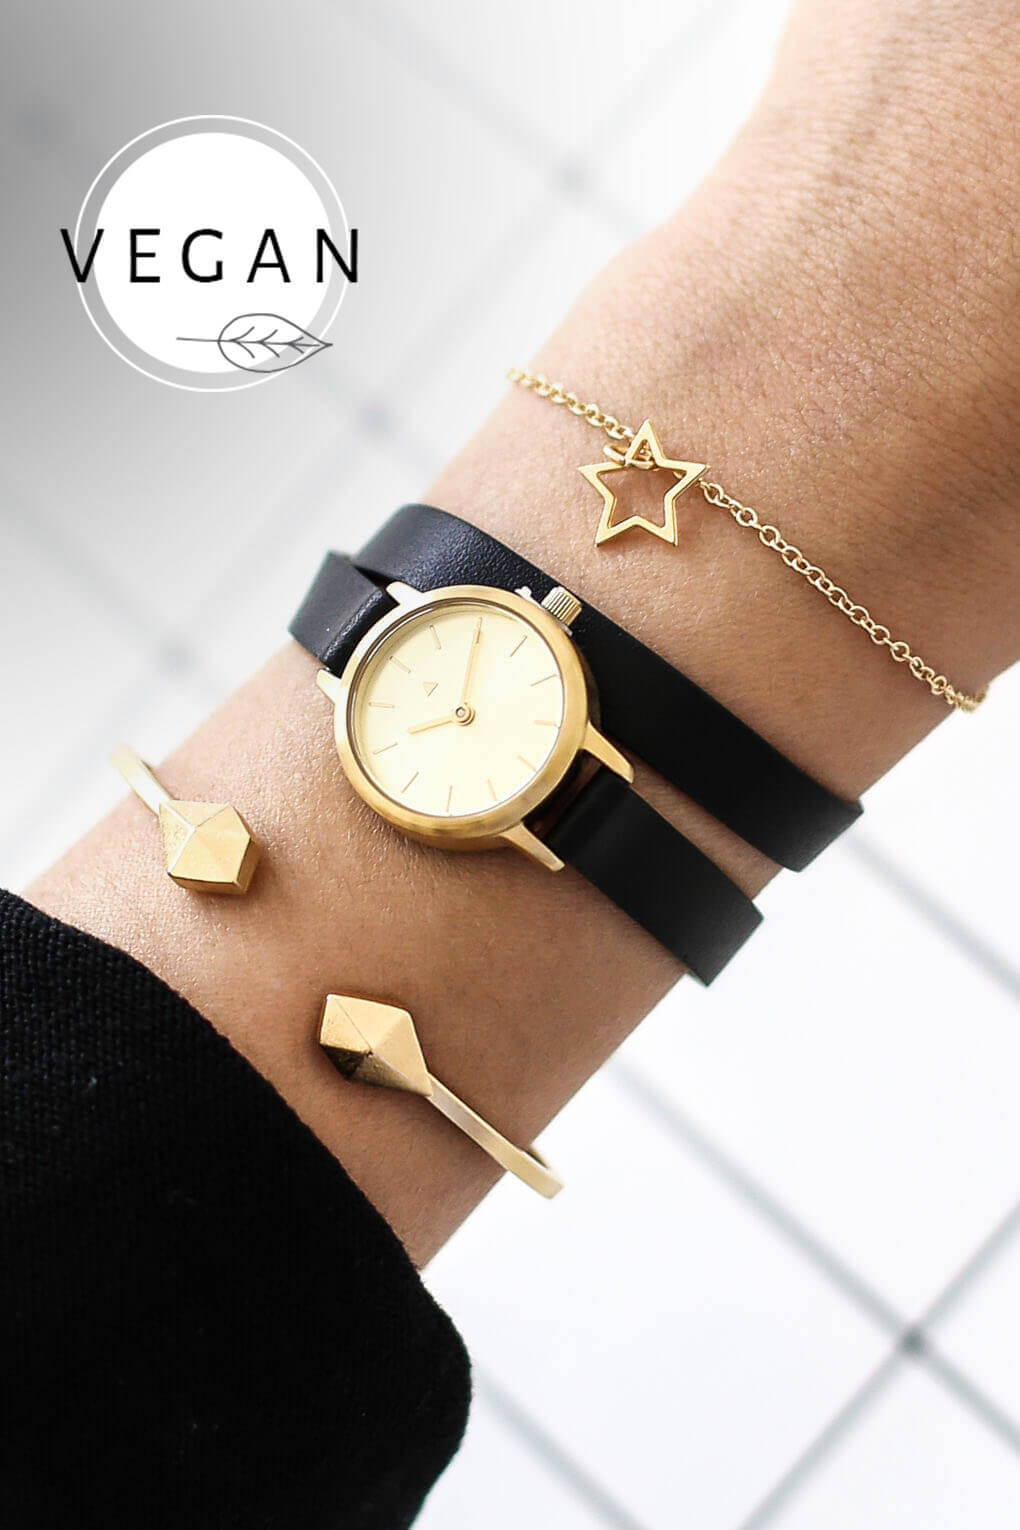 22 mm watch in gold and black - Vegan